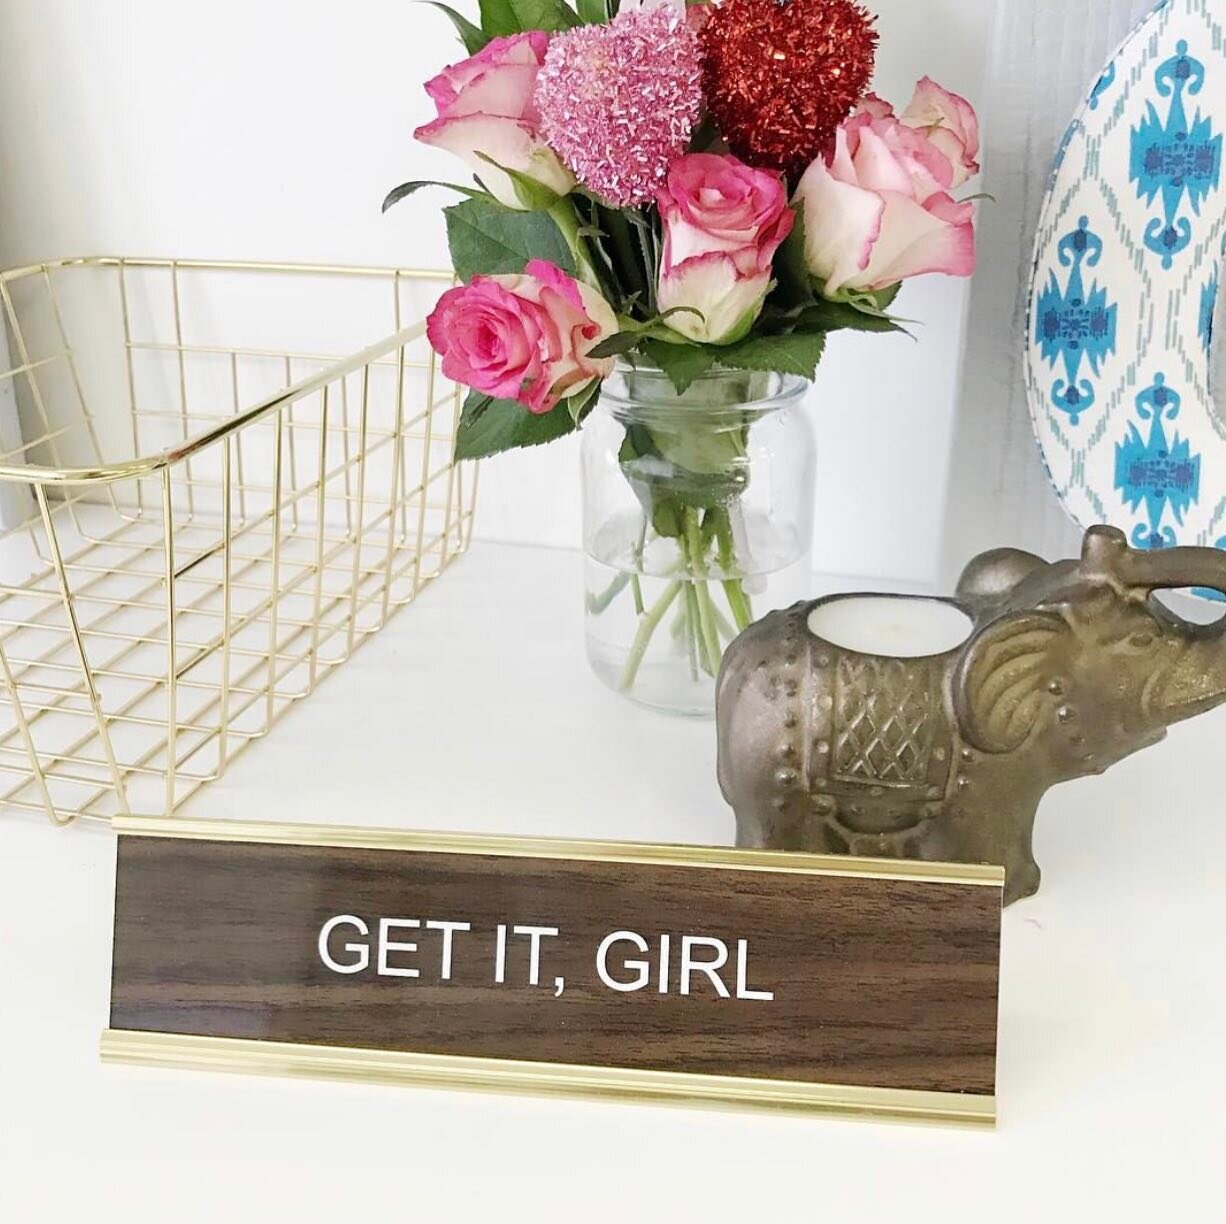 I have three of these &ldquo;GET IT, GIRL&rdquo; desk plaques that I&rsquo;d love to see on one of your desks! (I actually have four, but keeping one for myself because how can I not??). 
.
.
$6ea no shipping, send me a DM to get my Venmo and to prov